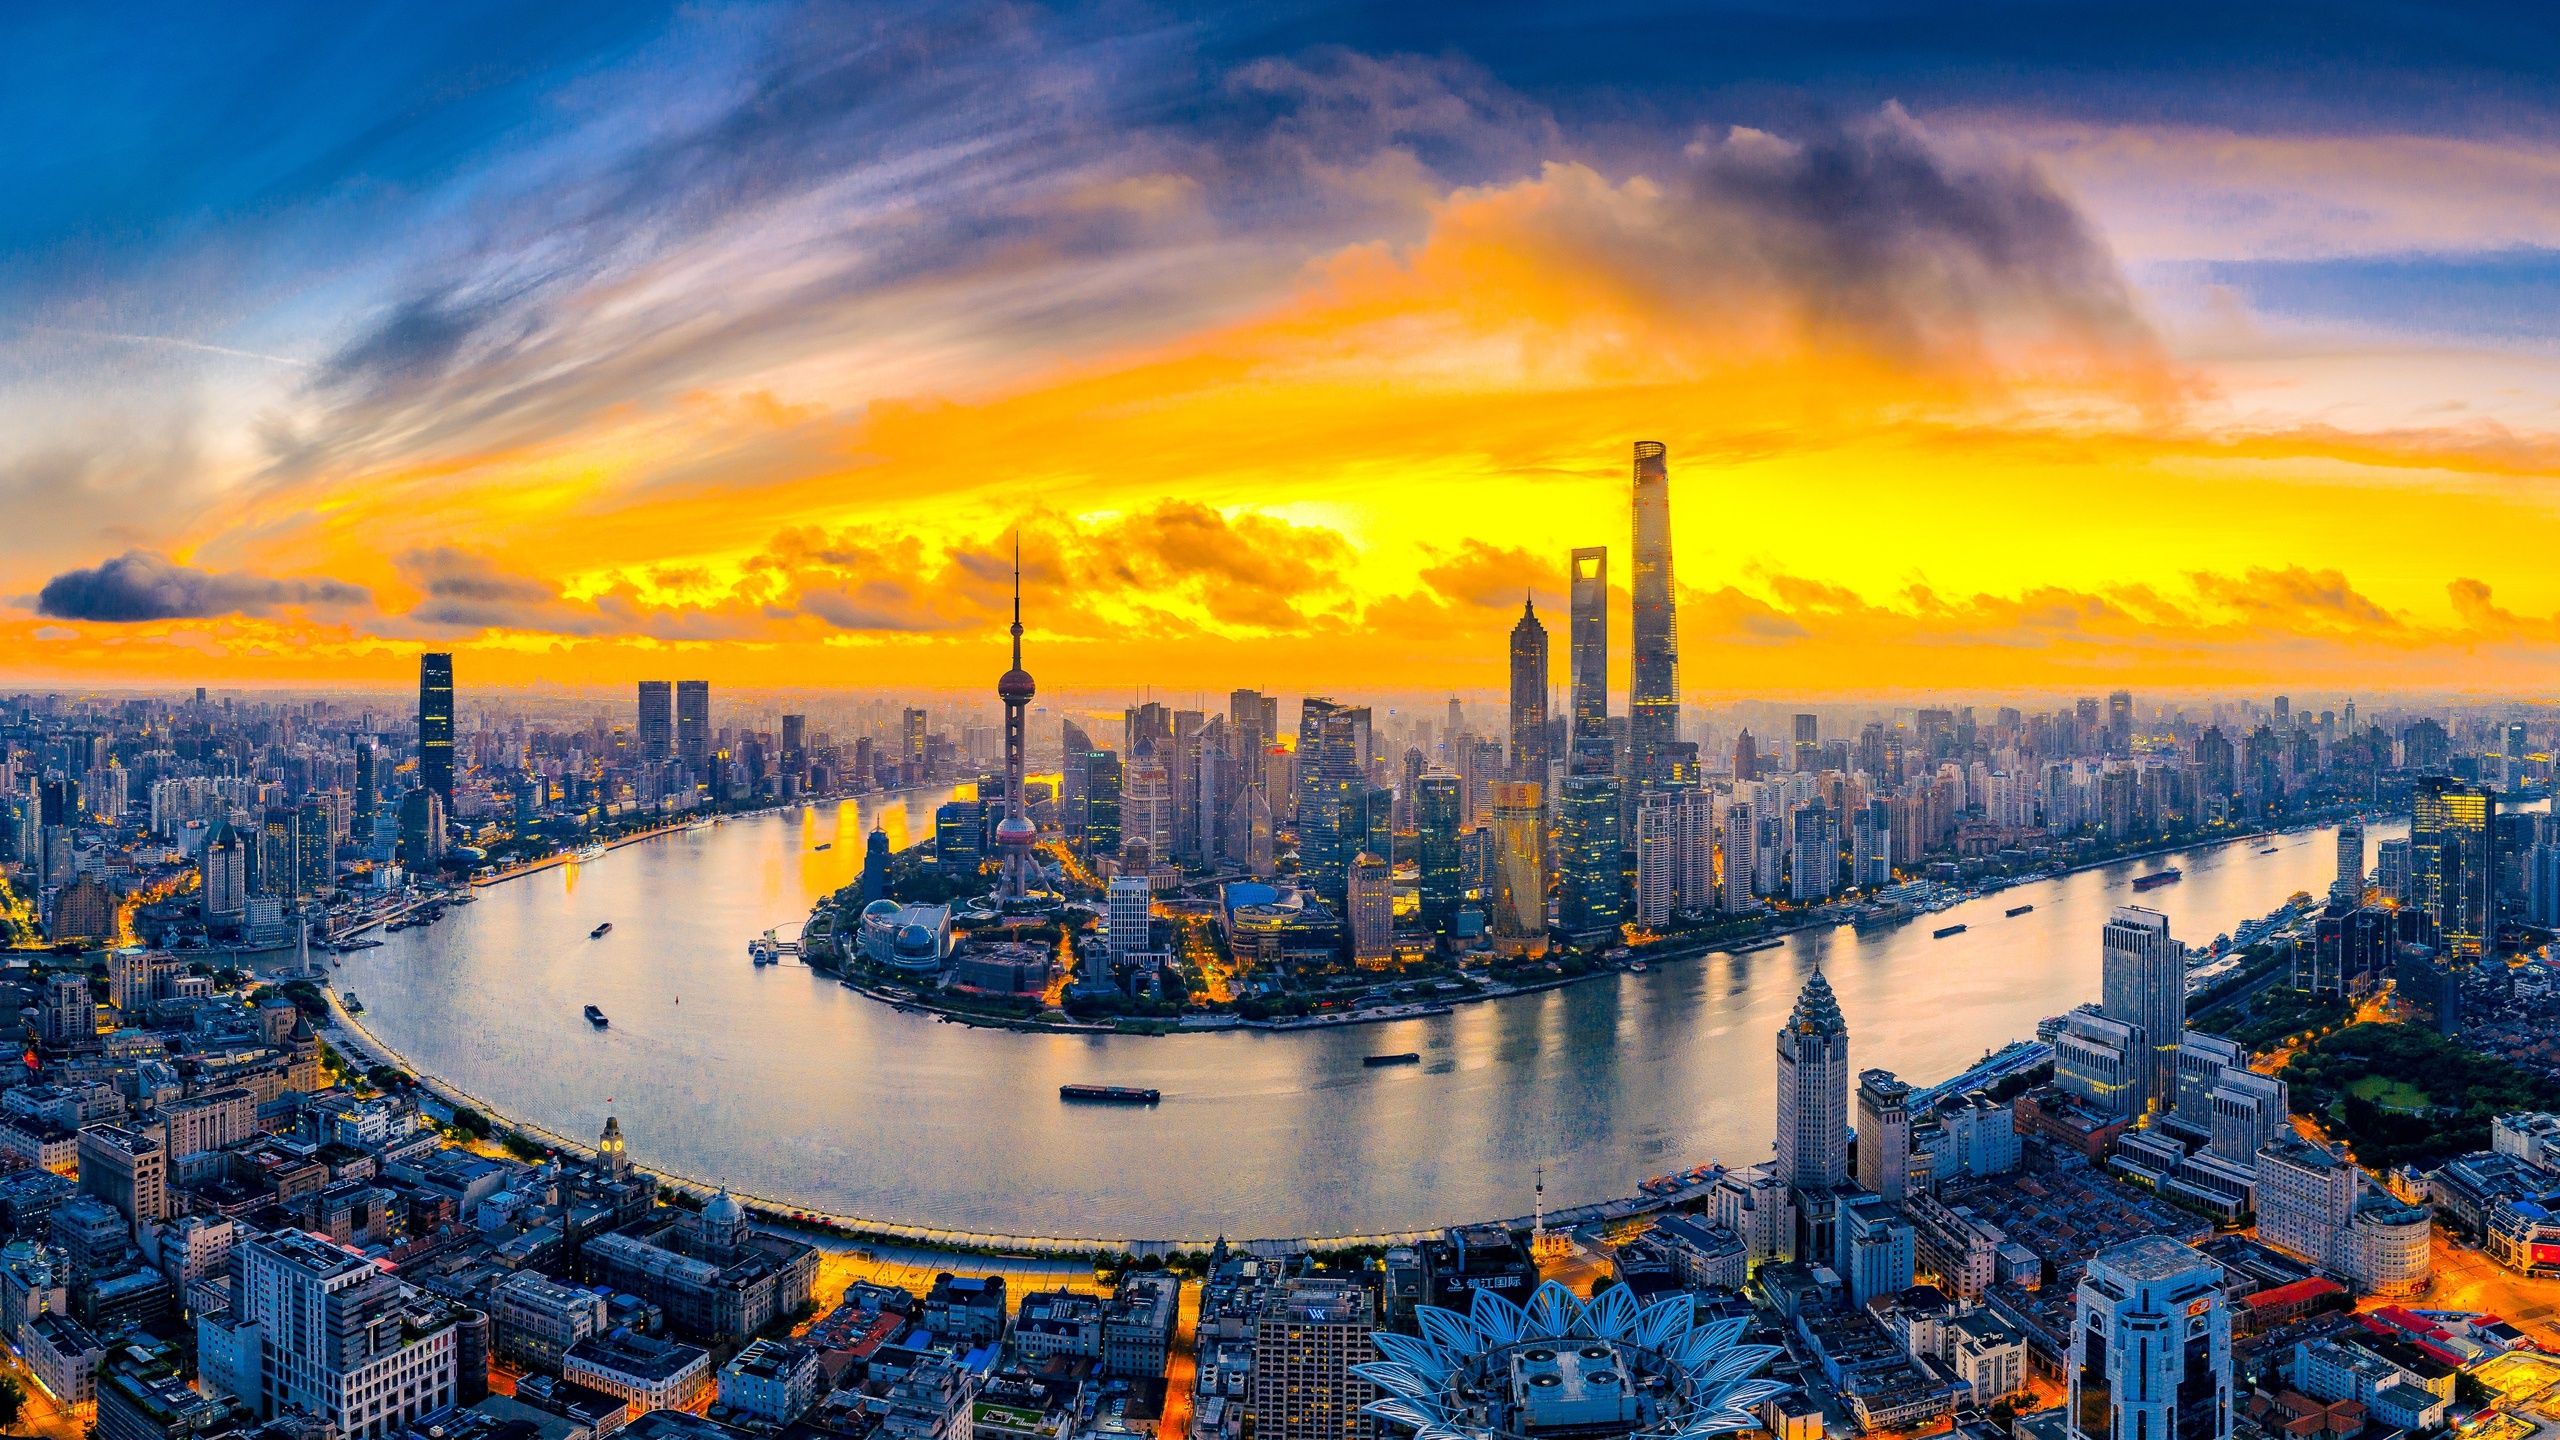 Shanghai Skyline, Sunset over river, Skyscrapers in the distance, Urban cityscape, 2560x1440 HD Desktop